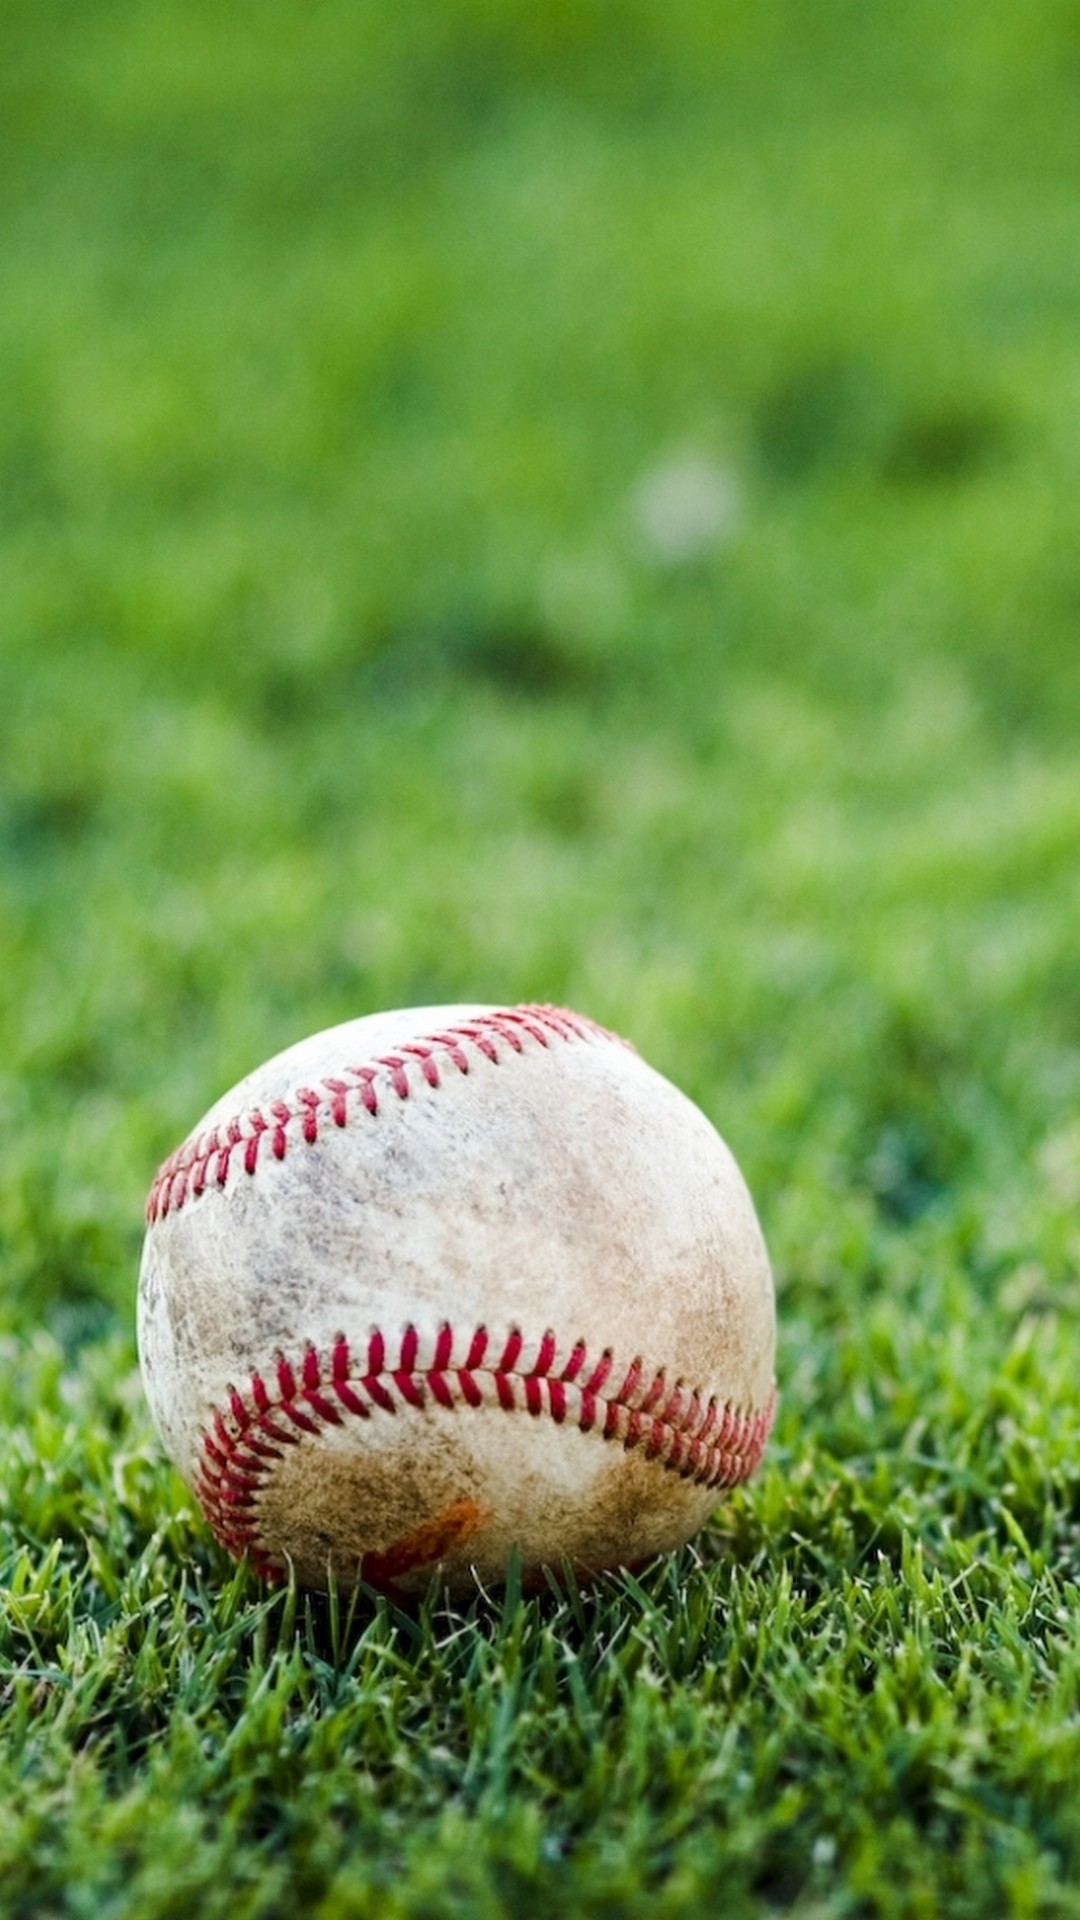 Baseball iPhone 6 Wallpaper with high-resolution 1080x1920 pixel. You can use this wallpaper for Mac Desktop Wallpaper, Laptop Screensavers, Android Wallpapers, Tablet or iPhone Home Screen and another mobile phone device